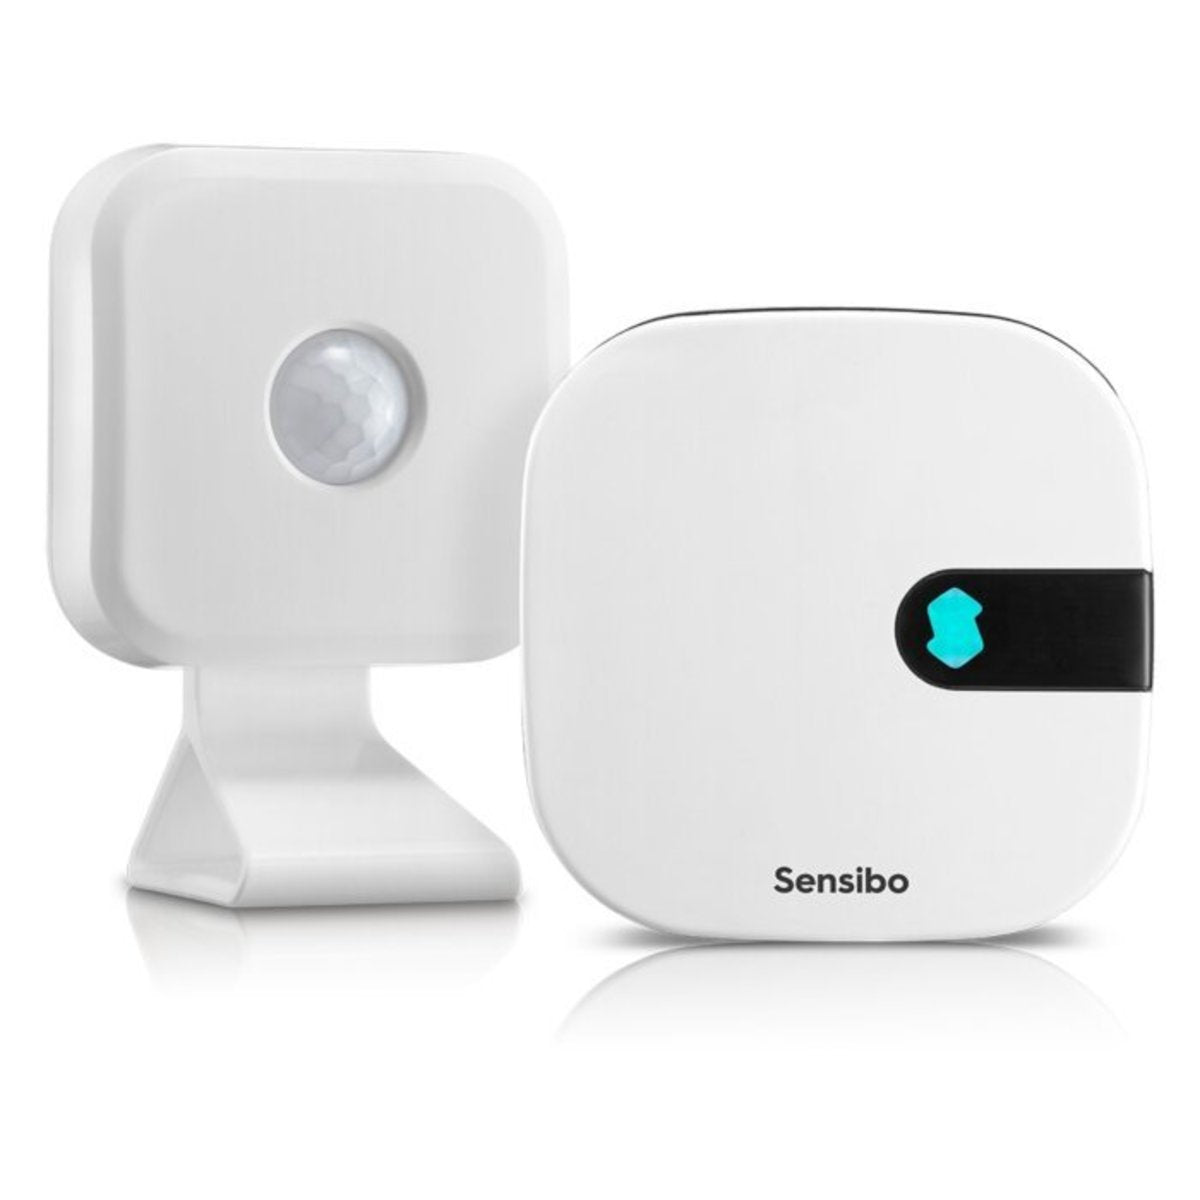 Sensibo - AIR smart air conditioner remote control - equipped with room sensor [Hong Kong licensed]